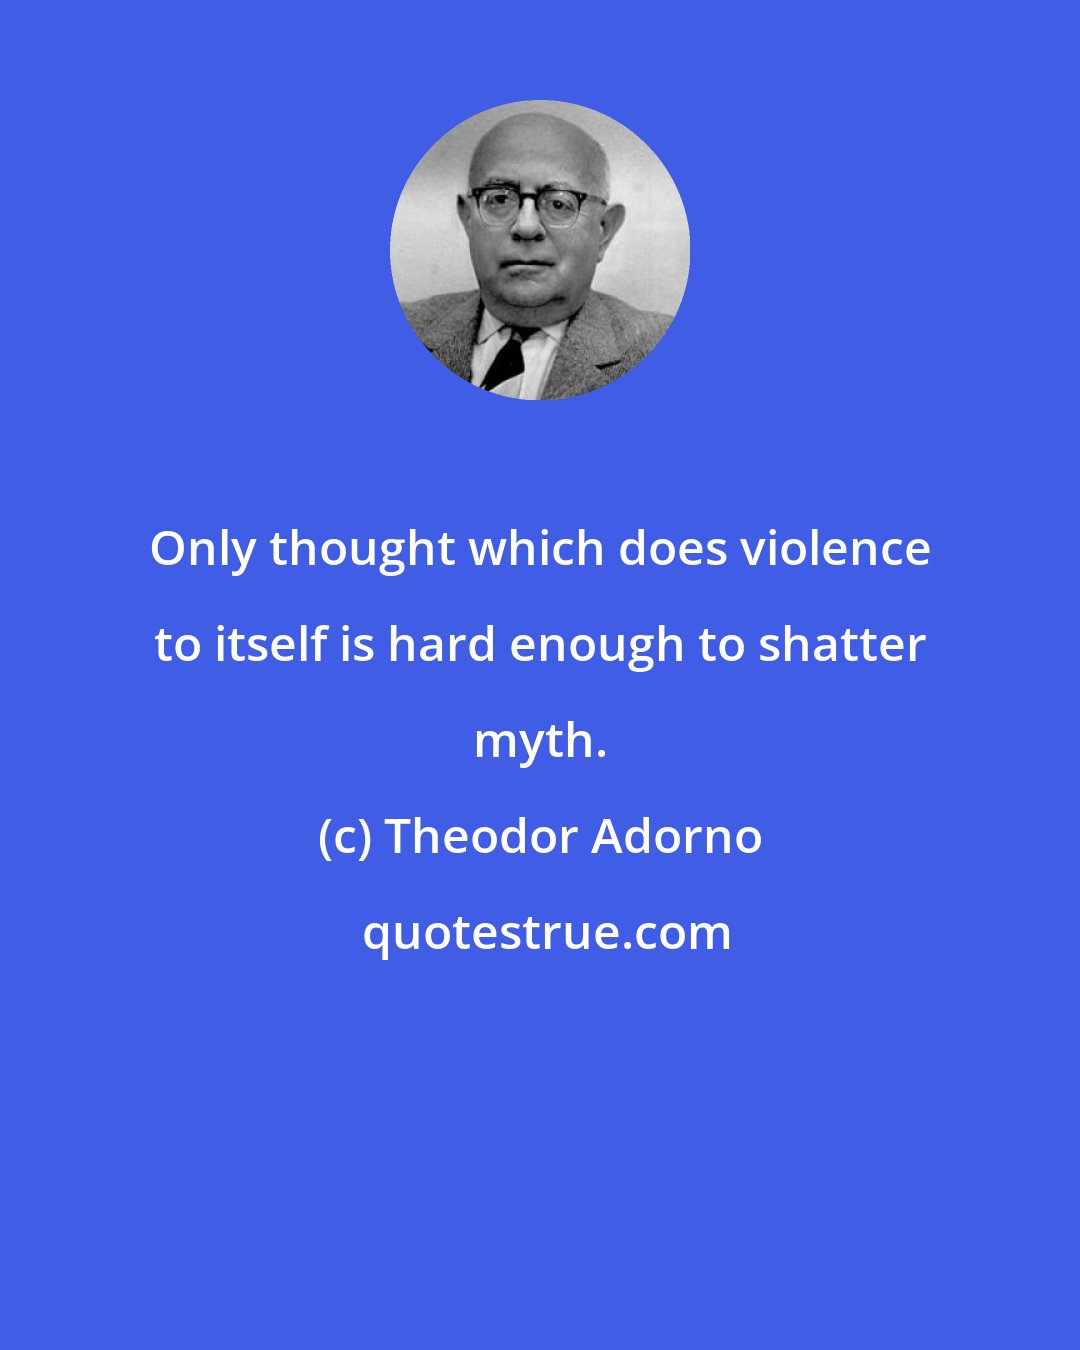 Theodor Adorno: Only thought which does violence to itself is hard enough to shatter myth.